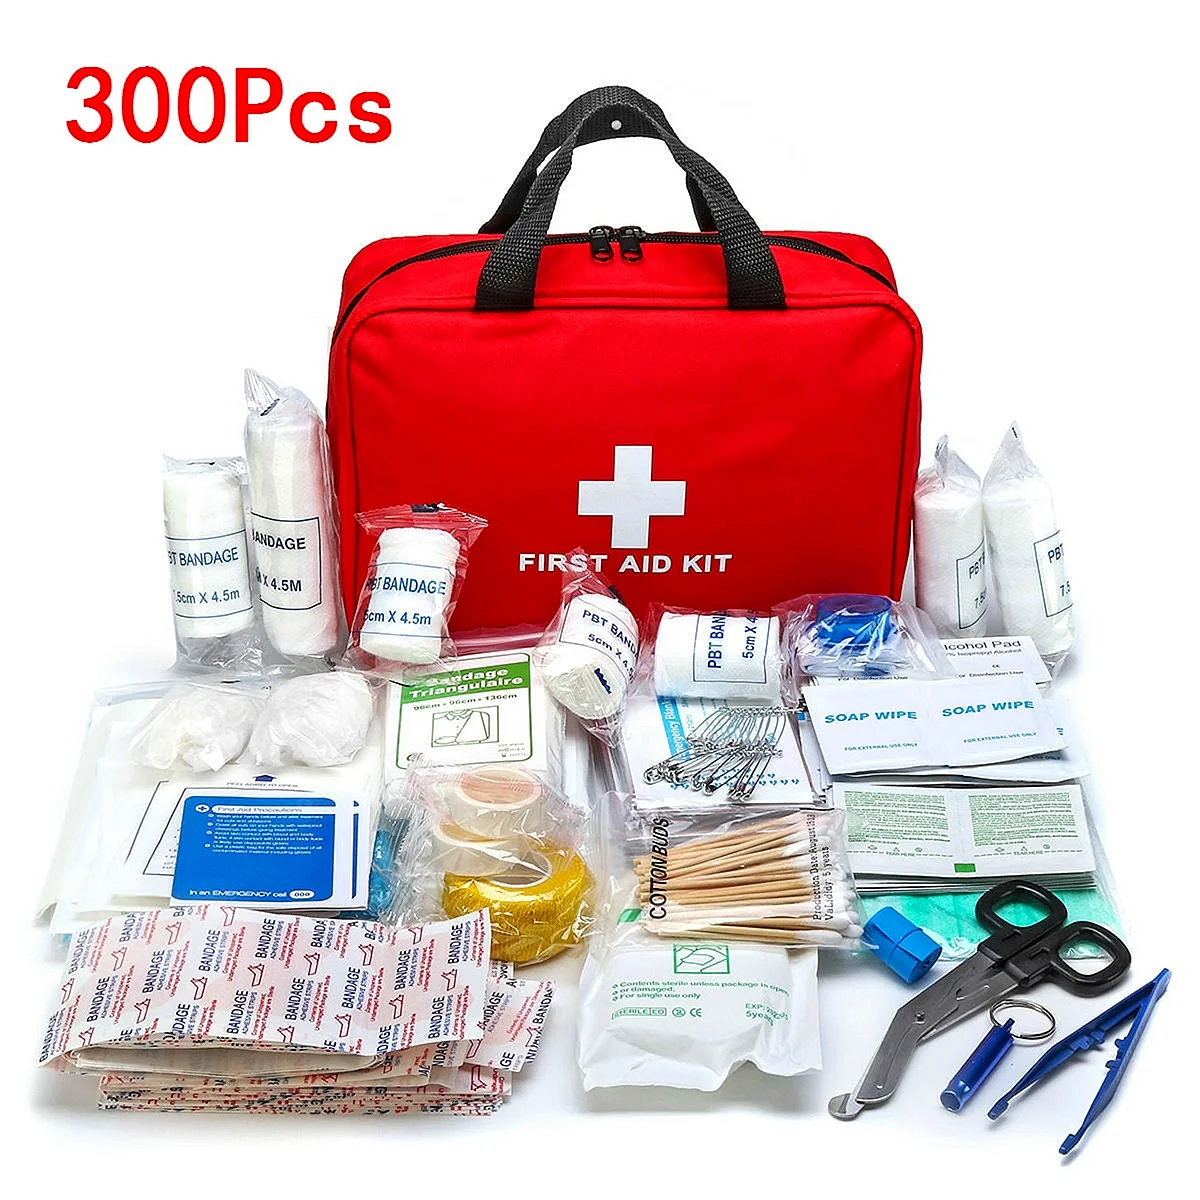 Аптечка first Aid Kit